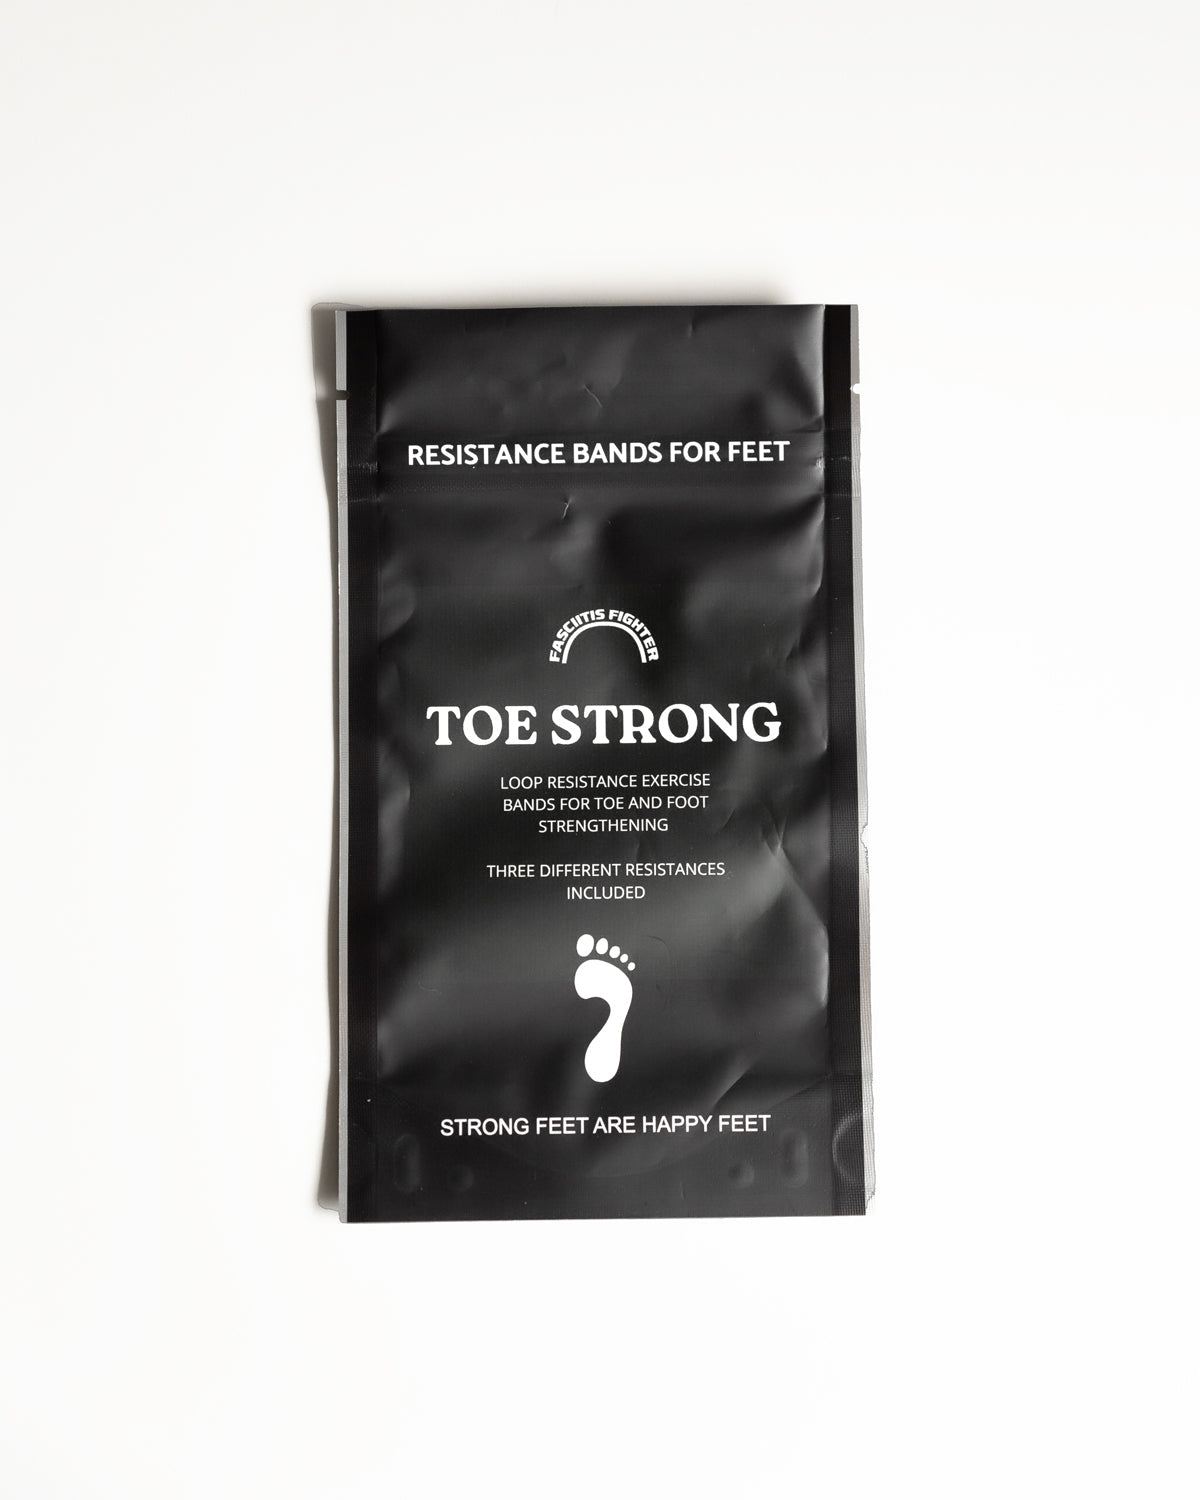 Toe Strong Resistance Bands